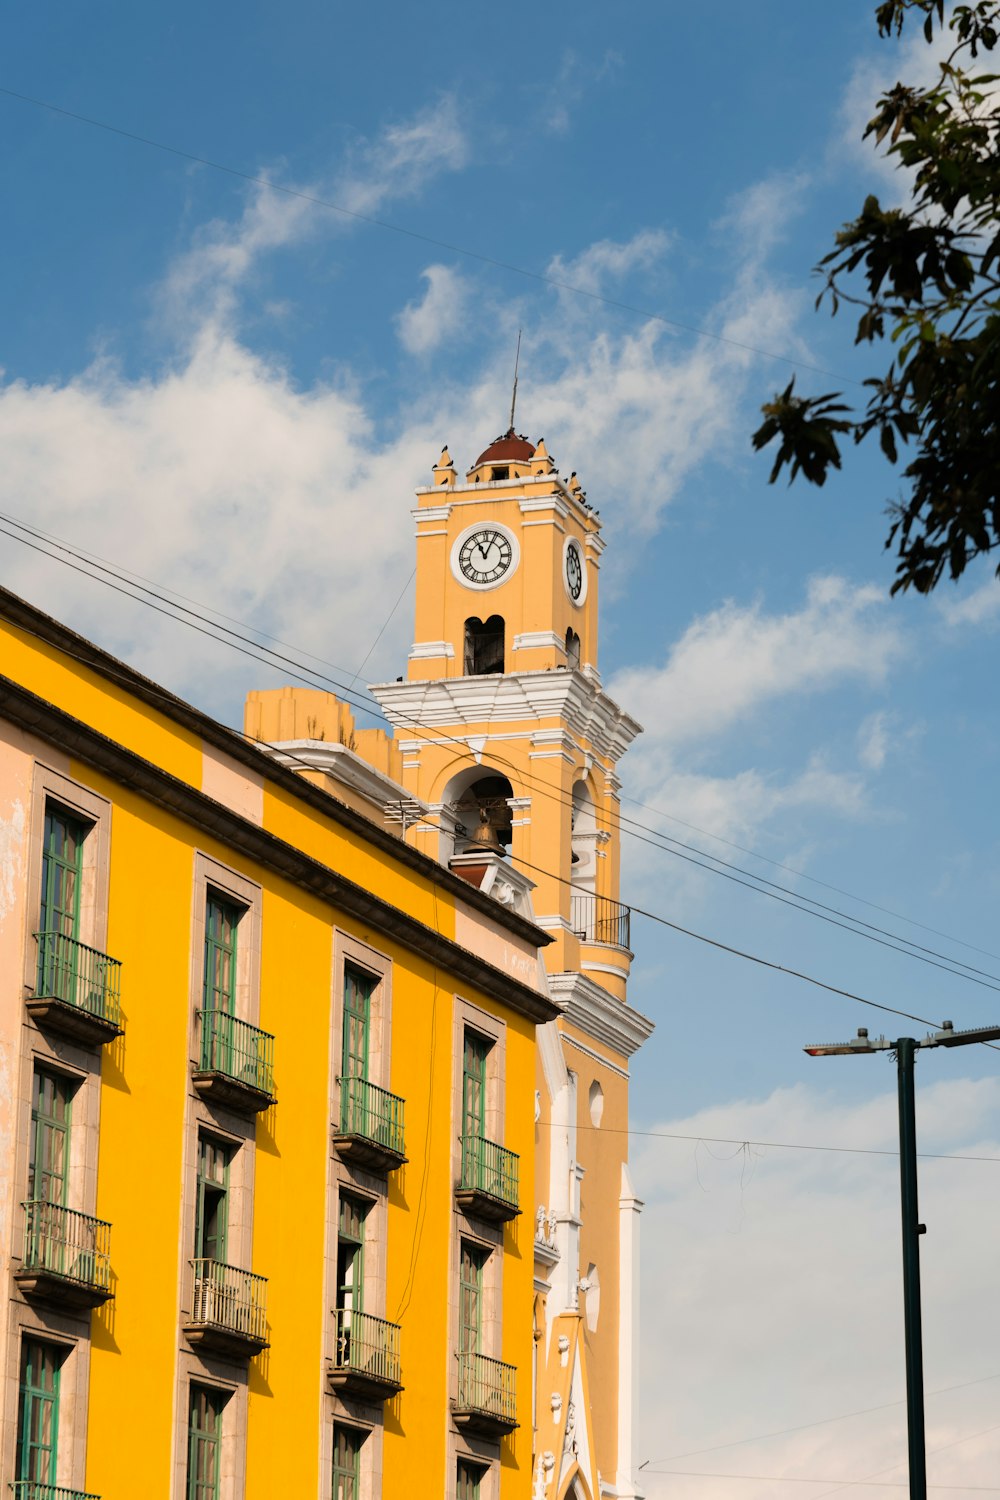 a tall yellow building with a clock tower